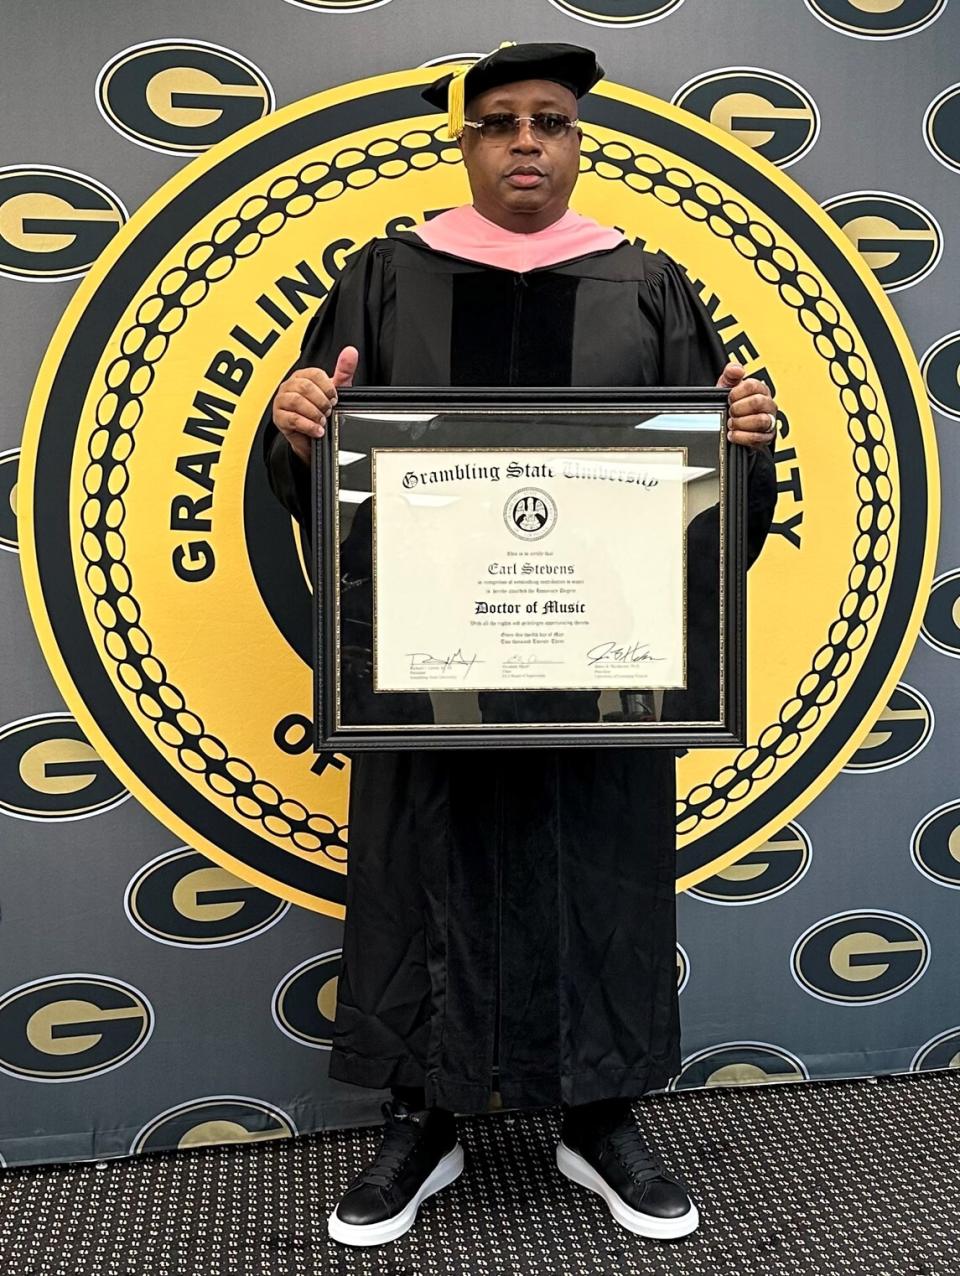 e-40 holding honorary doctorate at grambling state